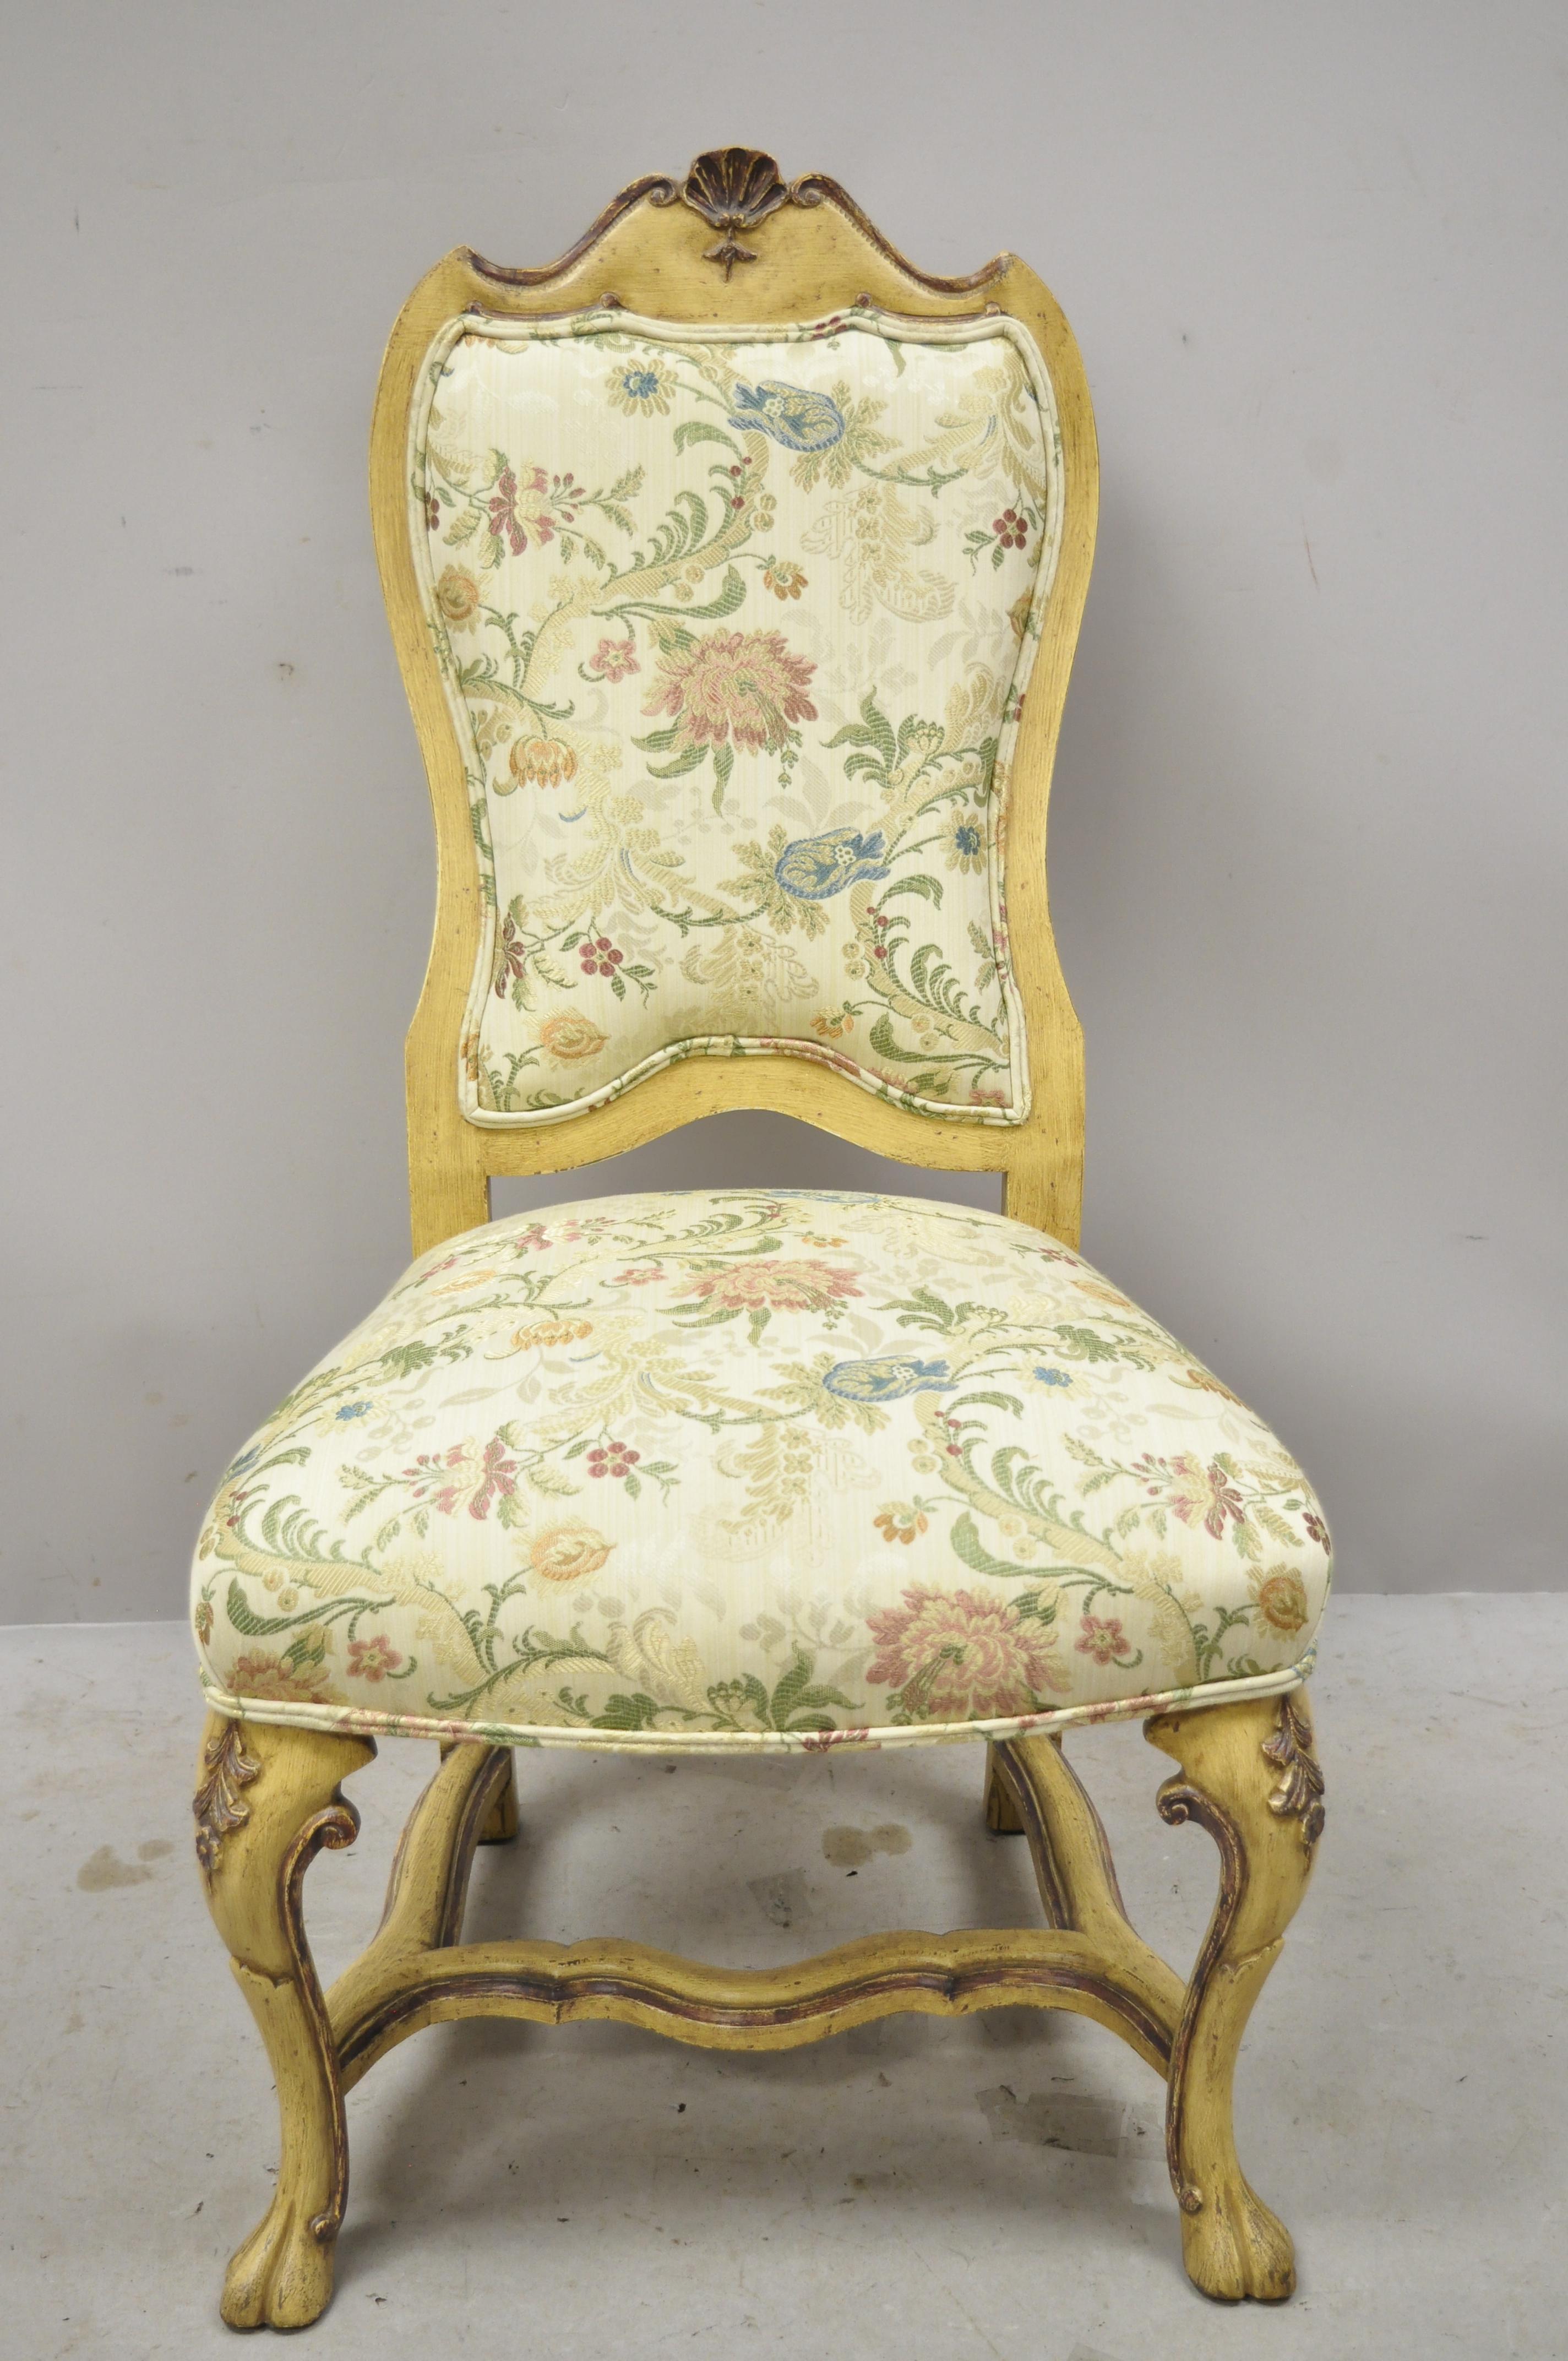 Minton Spidell Italian Regency Rococo style cream painted dining chairs - Set of 4. Item features (4) Side chairs, cream distress painted finish, solid wood frame, nicely carved details, original label, quality American craftsmanship, great style